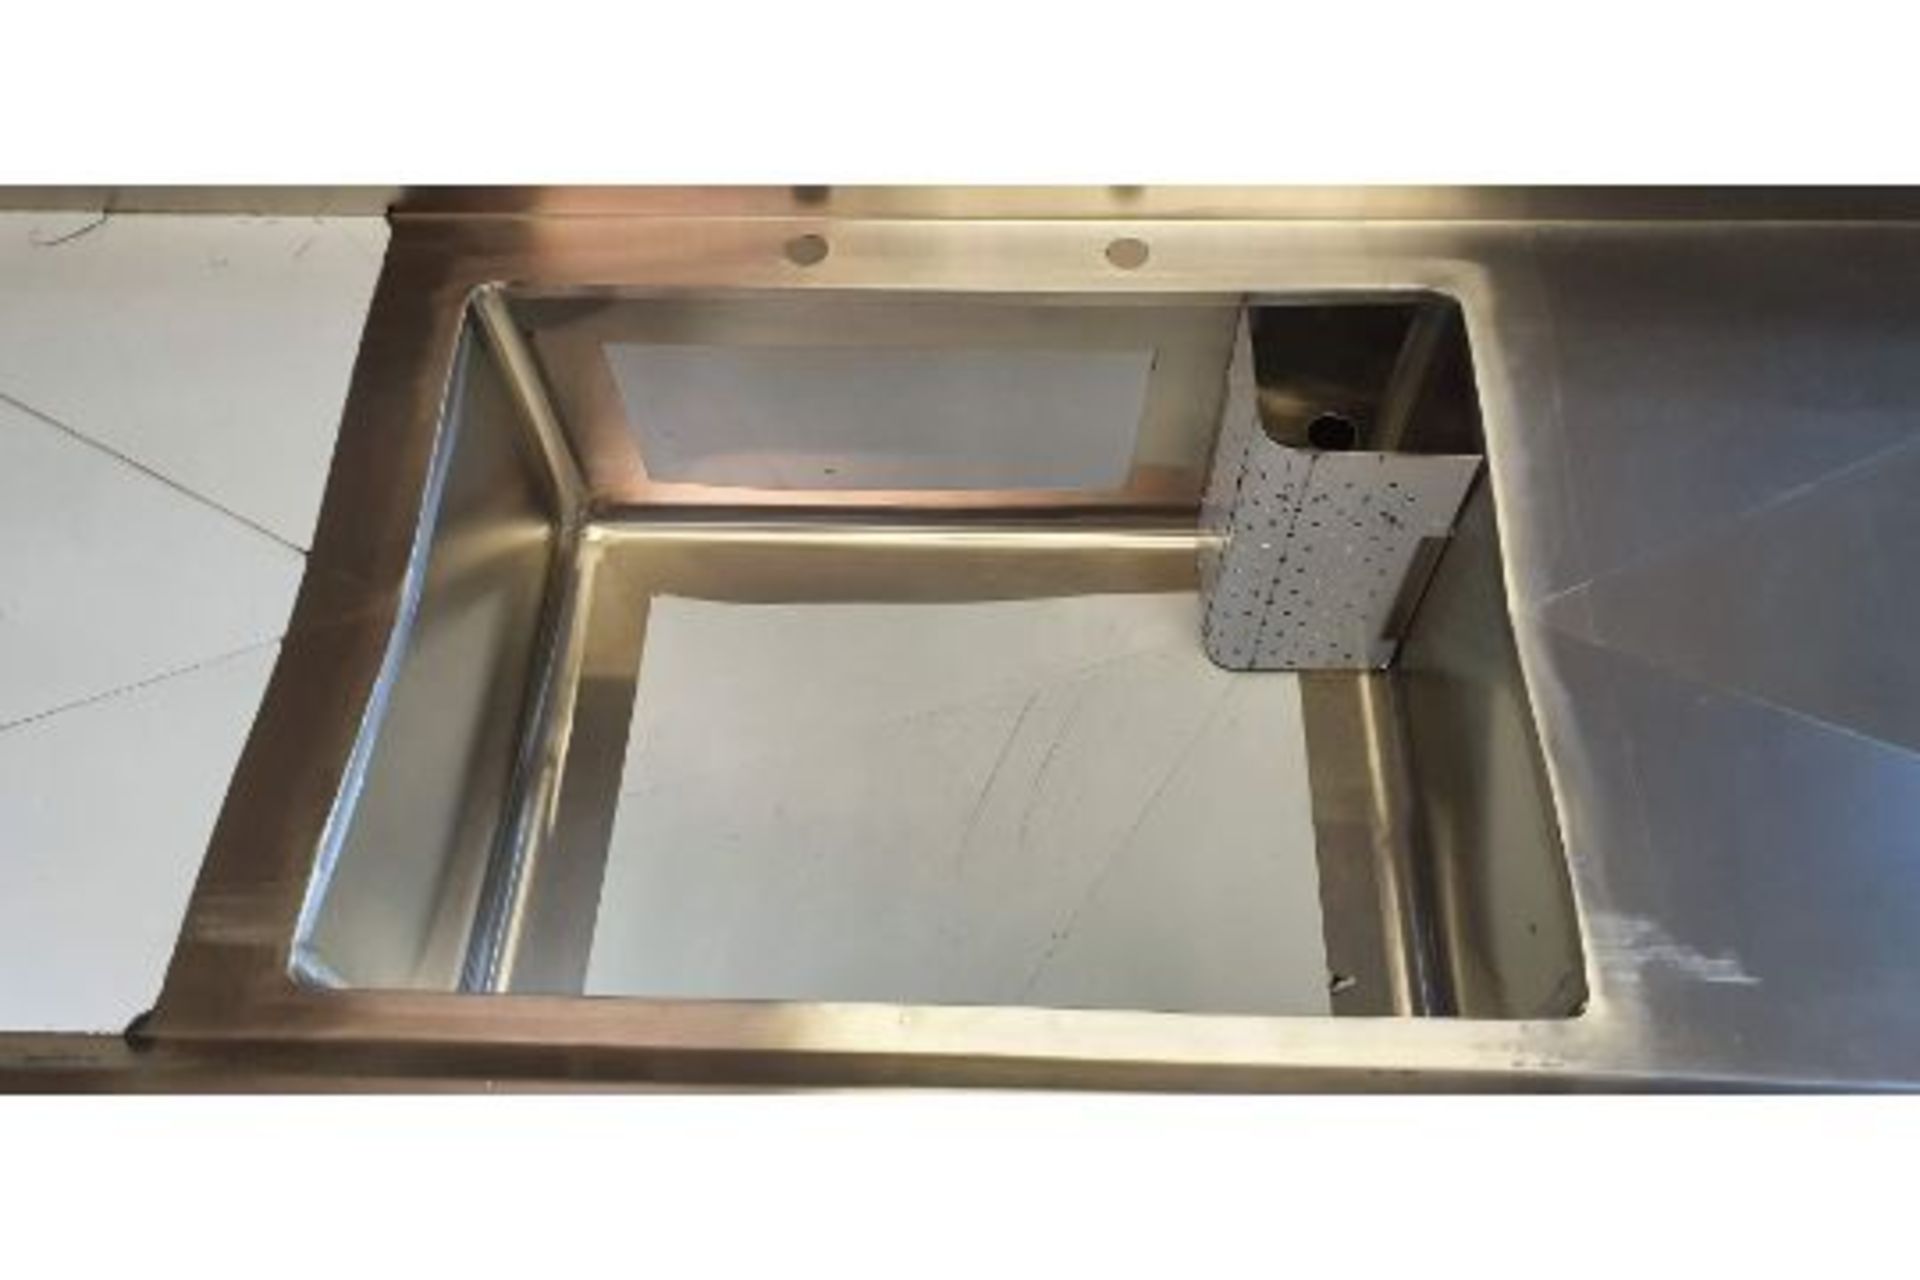 Stainless Steel Catering Sink - Heavy duty - Image 2 of 4